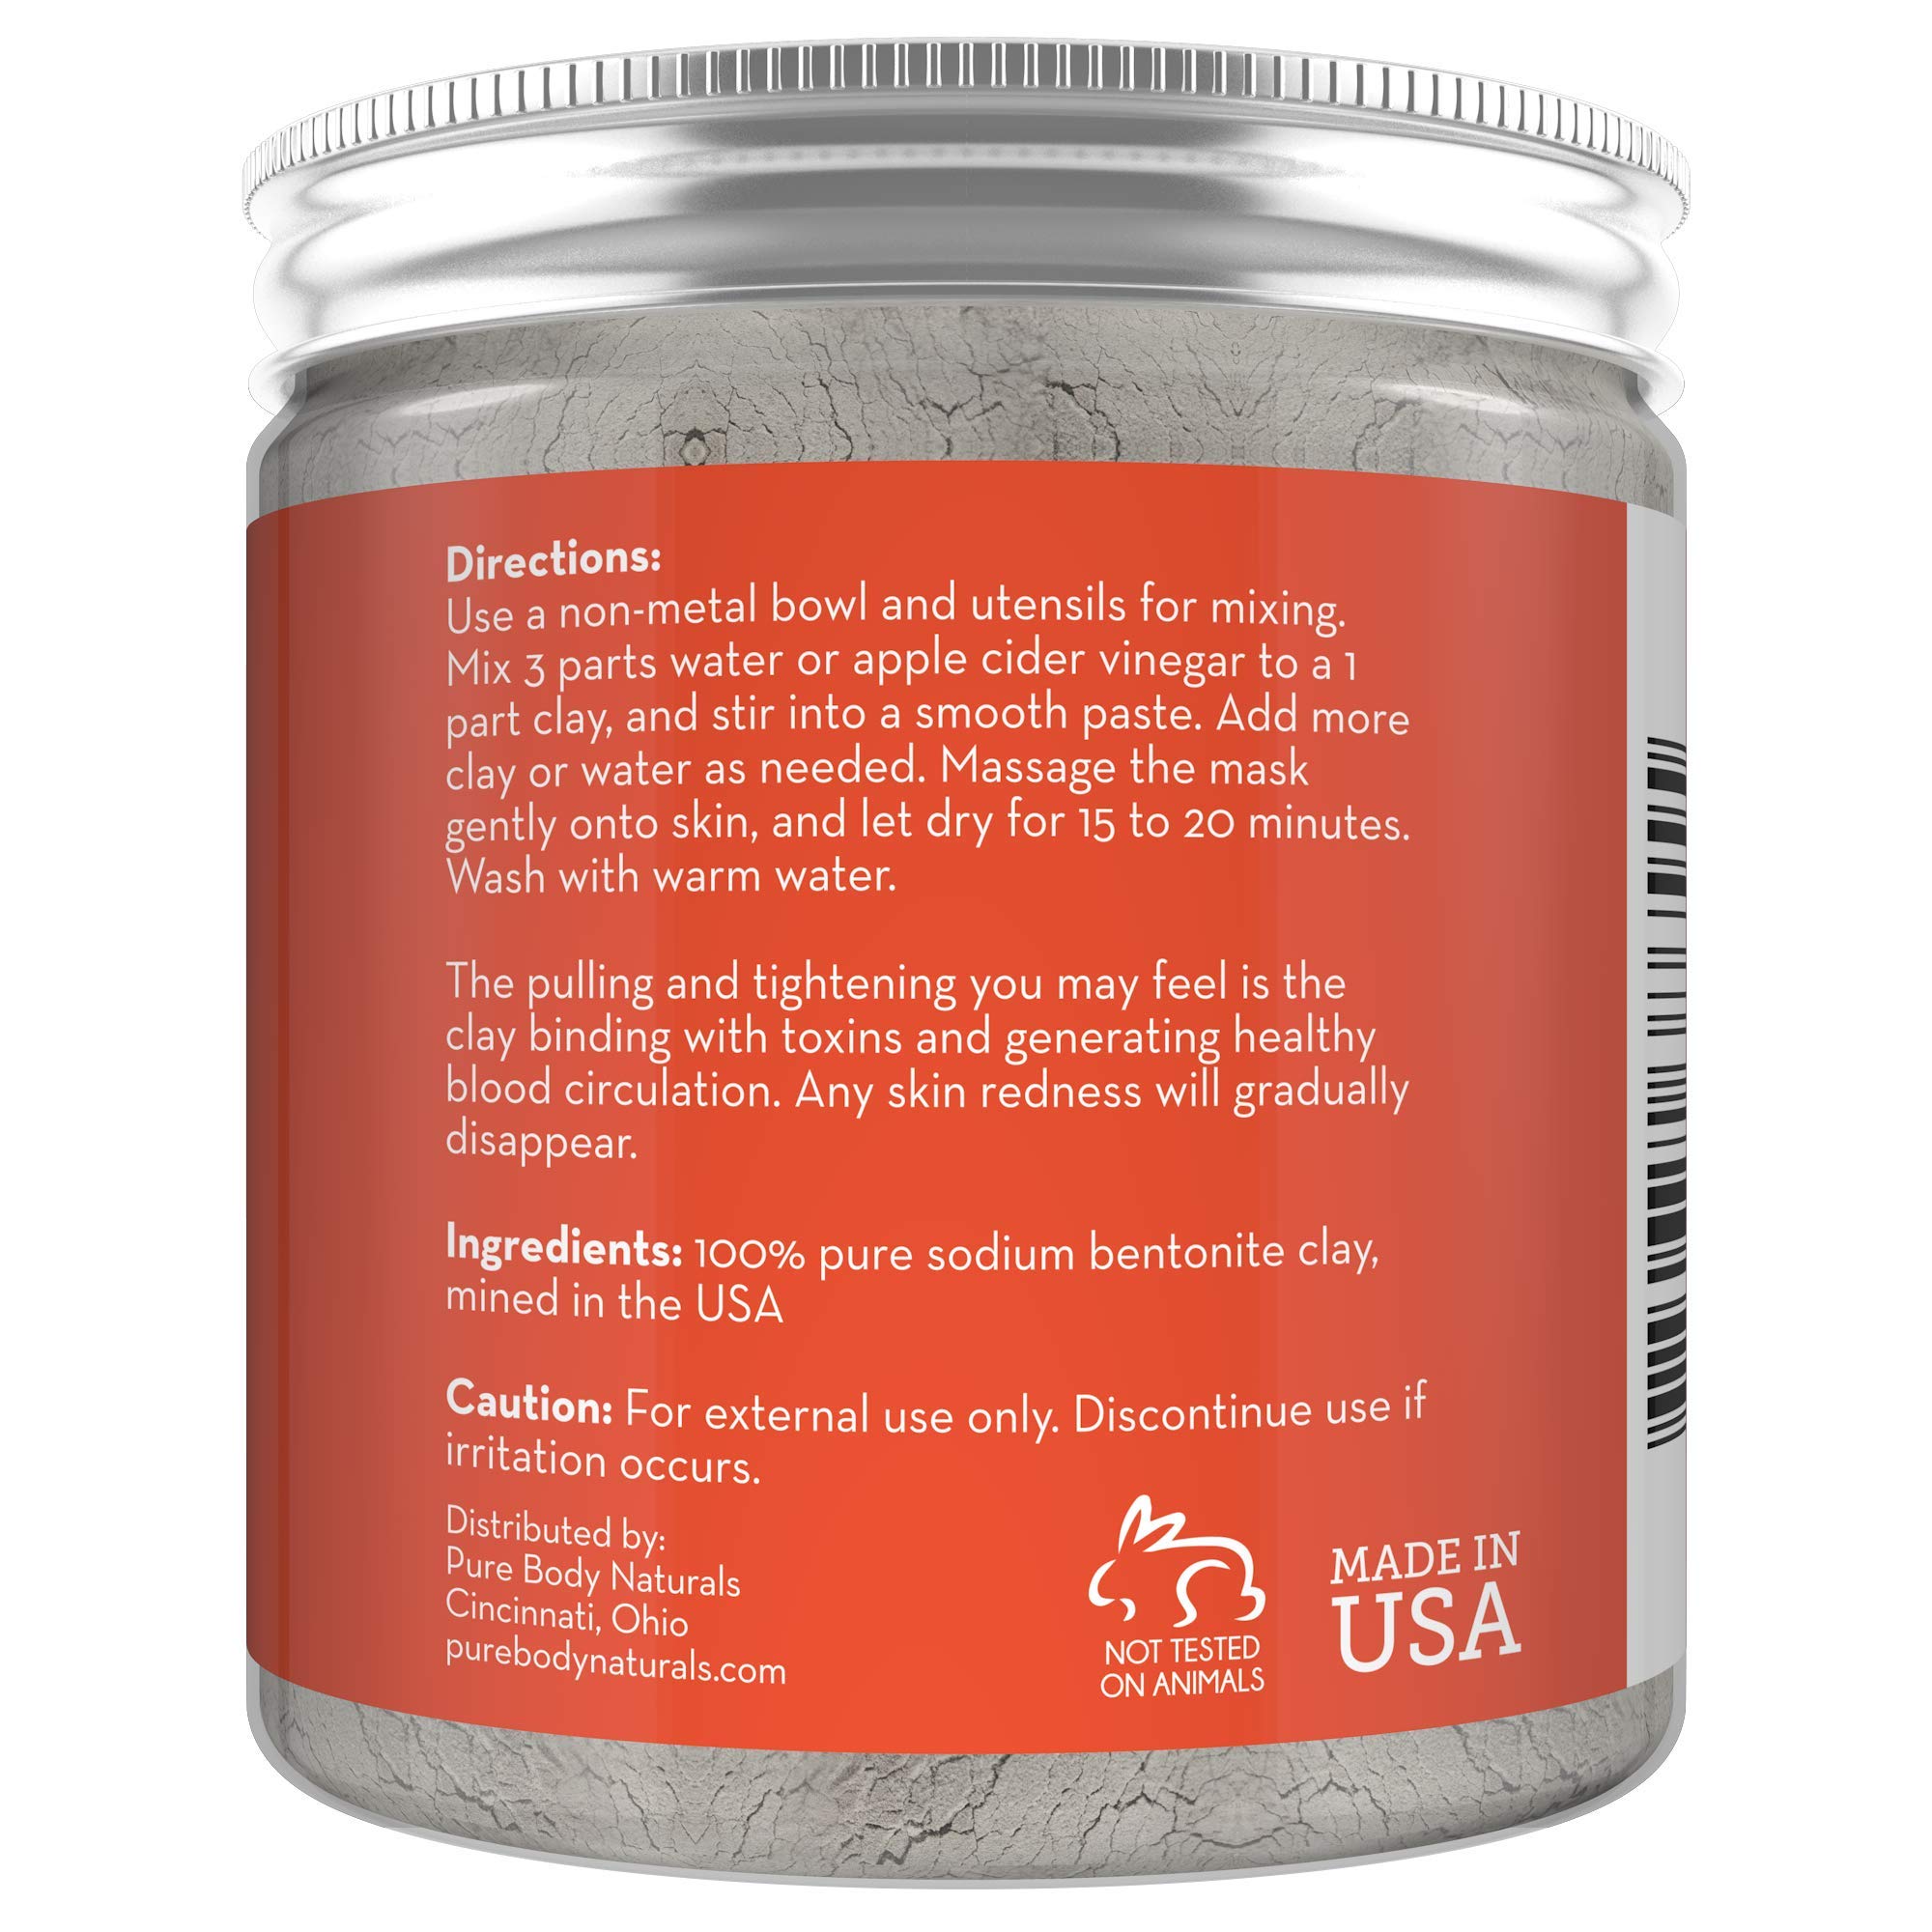 Pure Body Naturals Pure Bentonite Powder for DIY Detox Bath & Facial Mask, Pure Indian Healing Clay for Burns, Mastitis, Inflamed or Chapped Skin (8.0 oz)